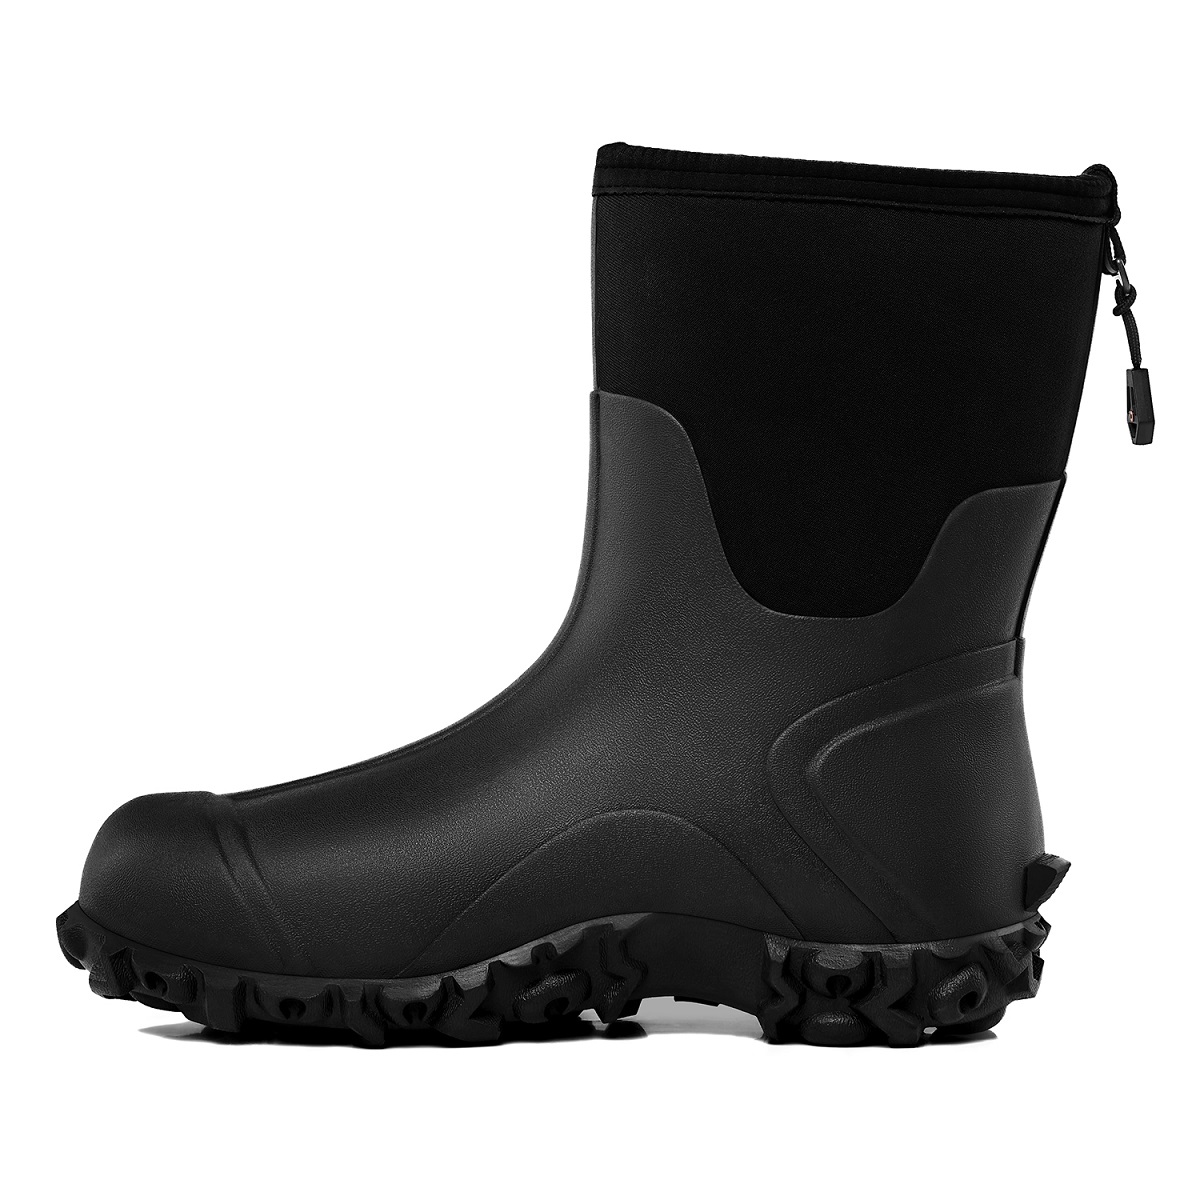 DRYCODE Rain Boots with Steel Shank